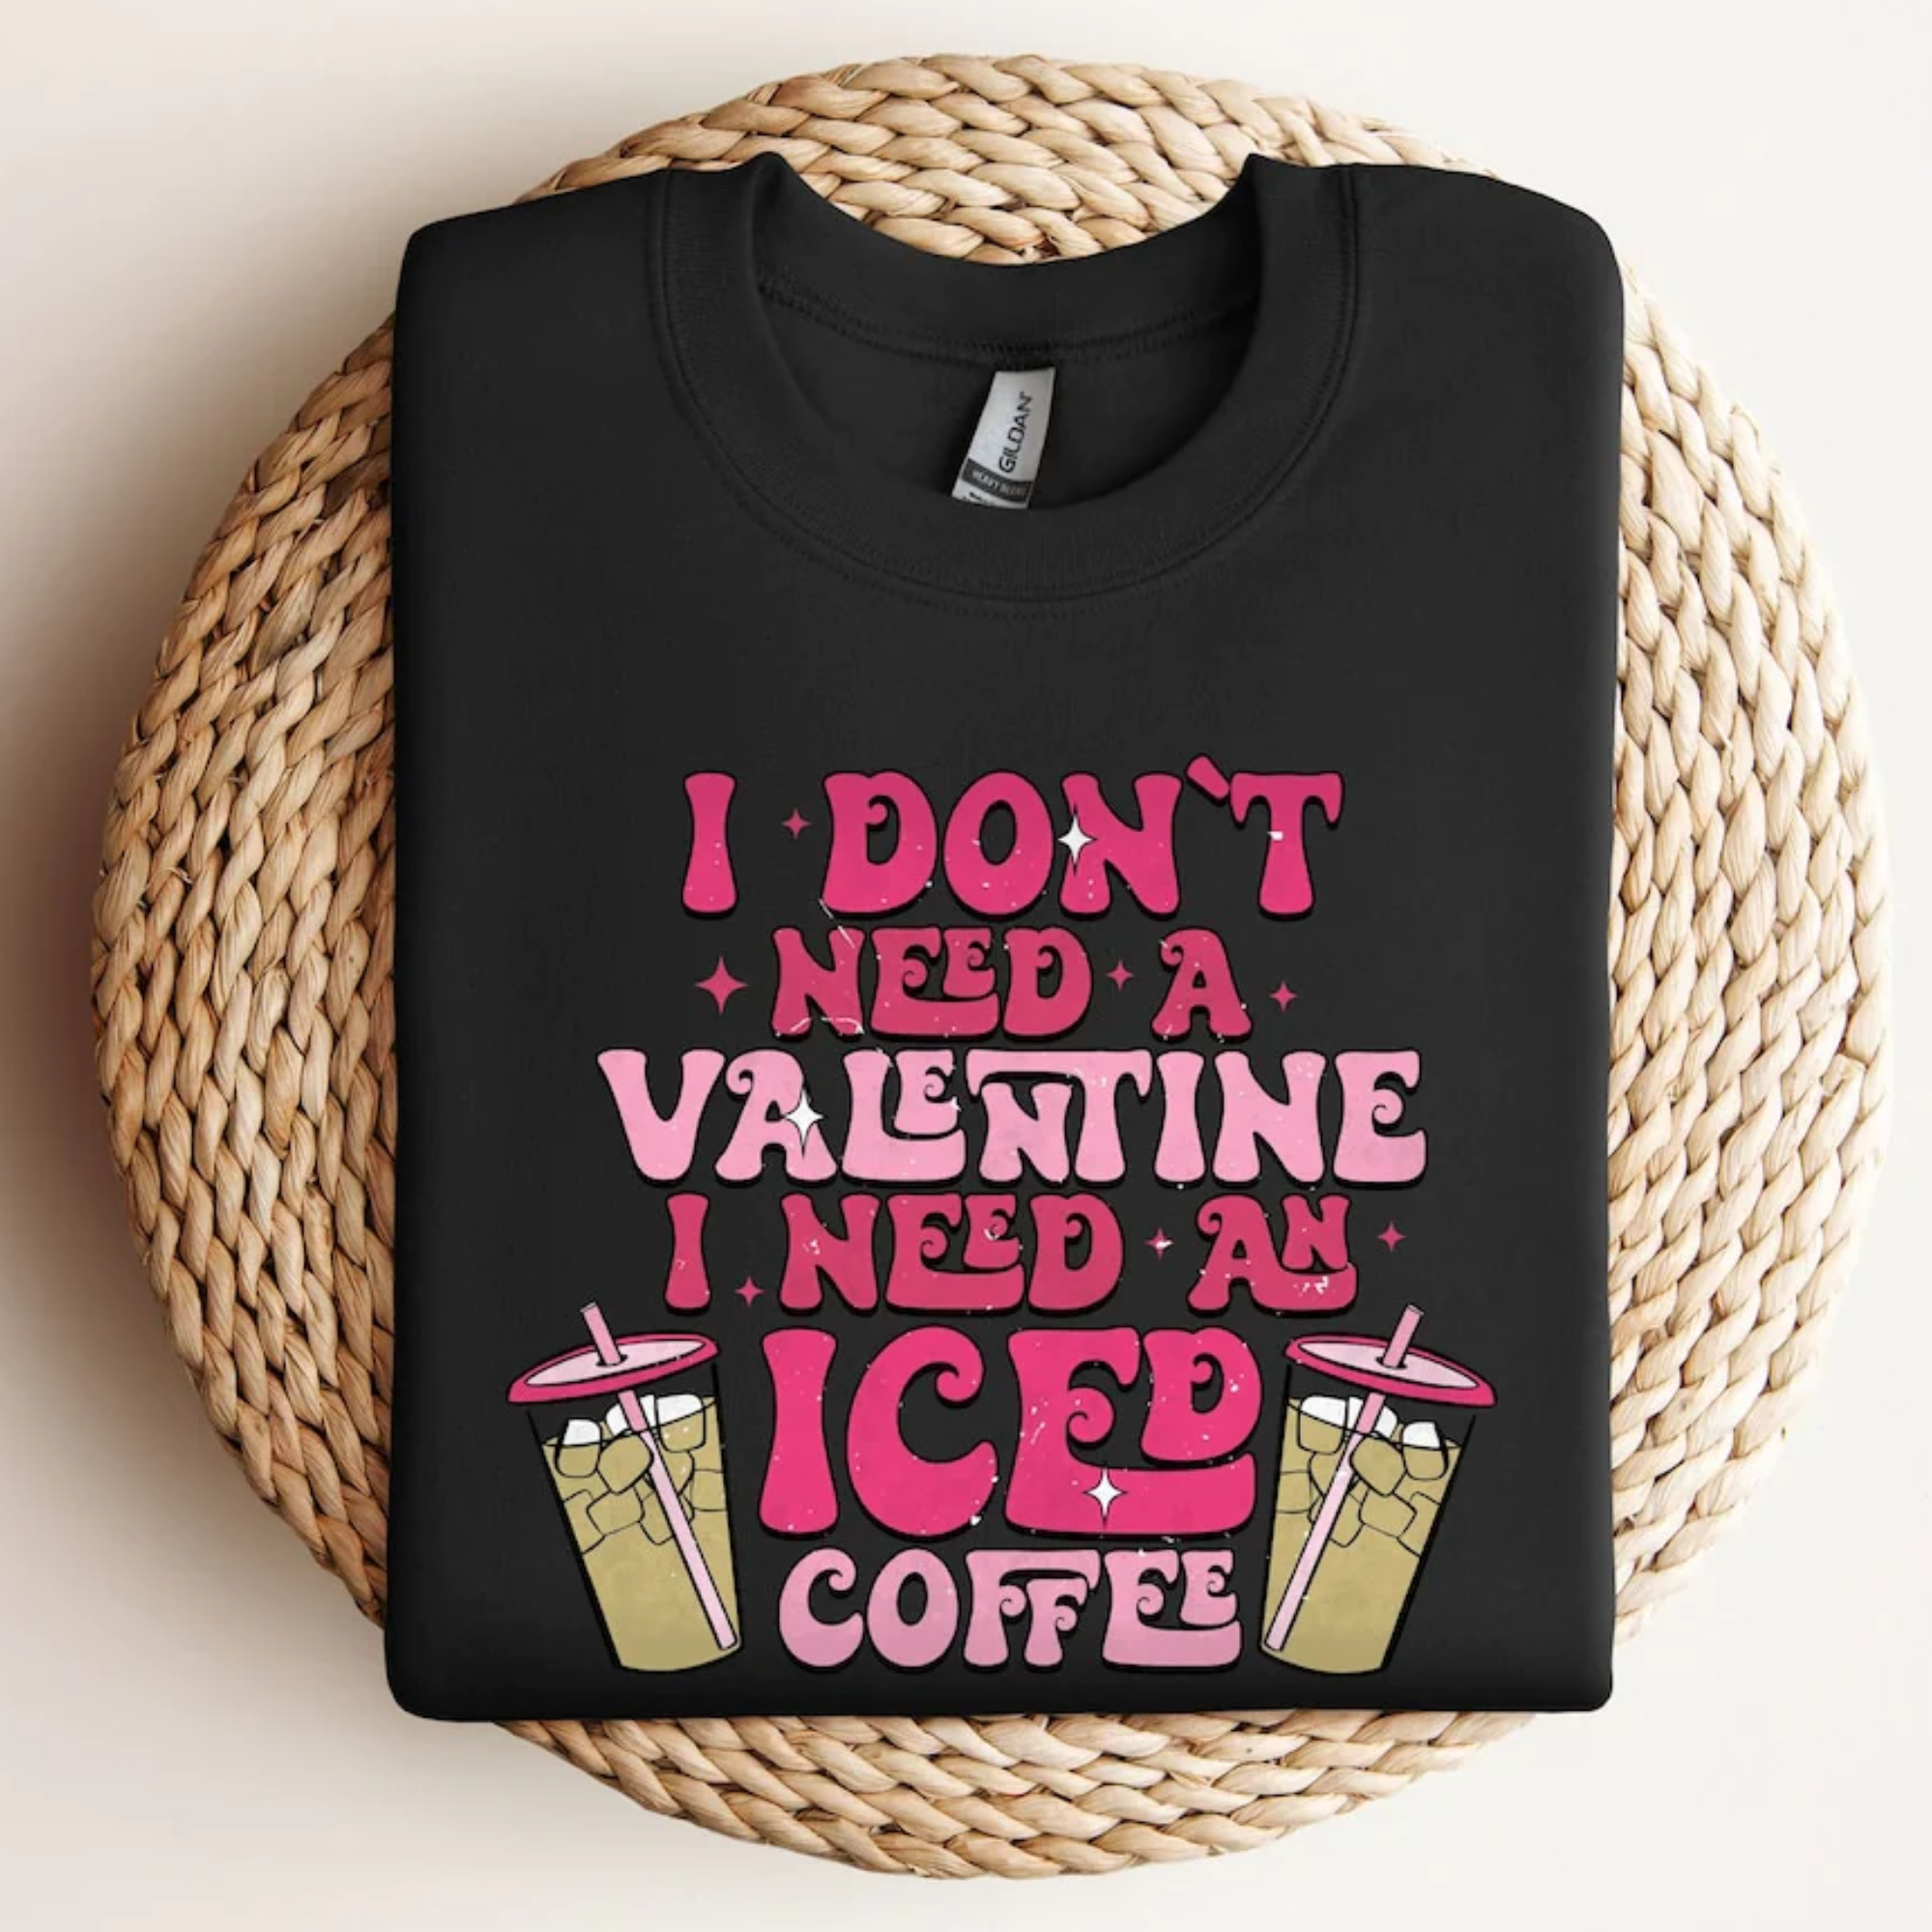 I Don't Need A Valentine - Gift For Couple, Wife, Girlfriend - Unisex Shirt